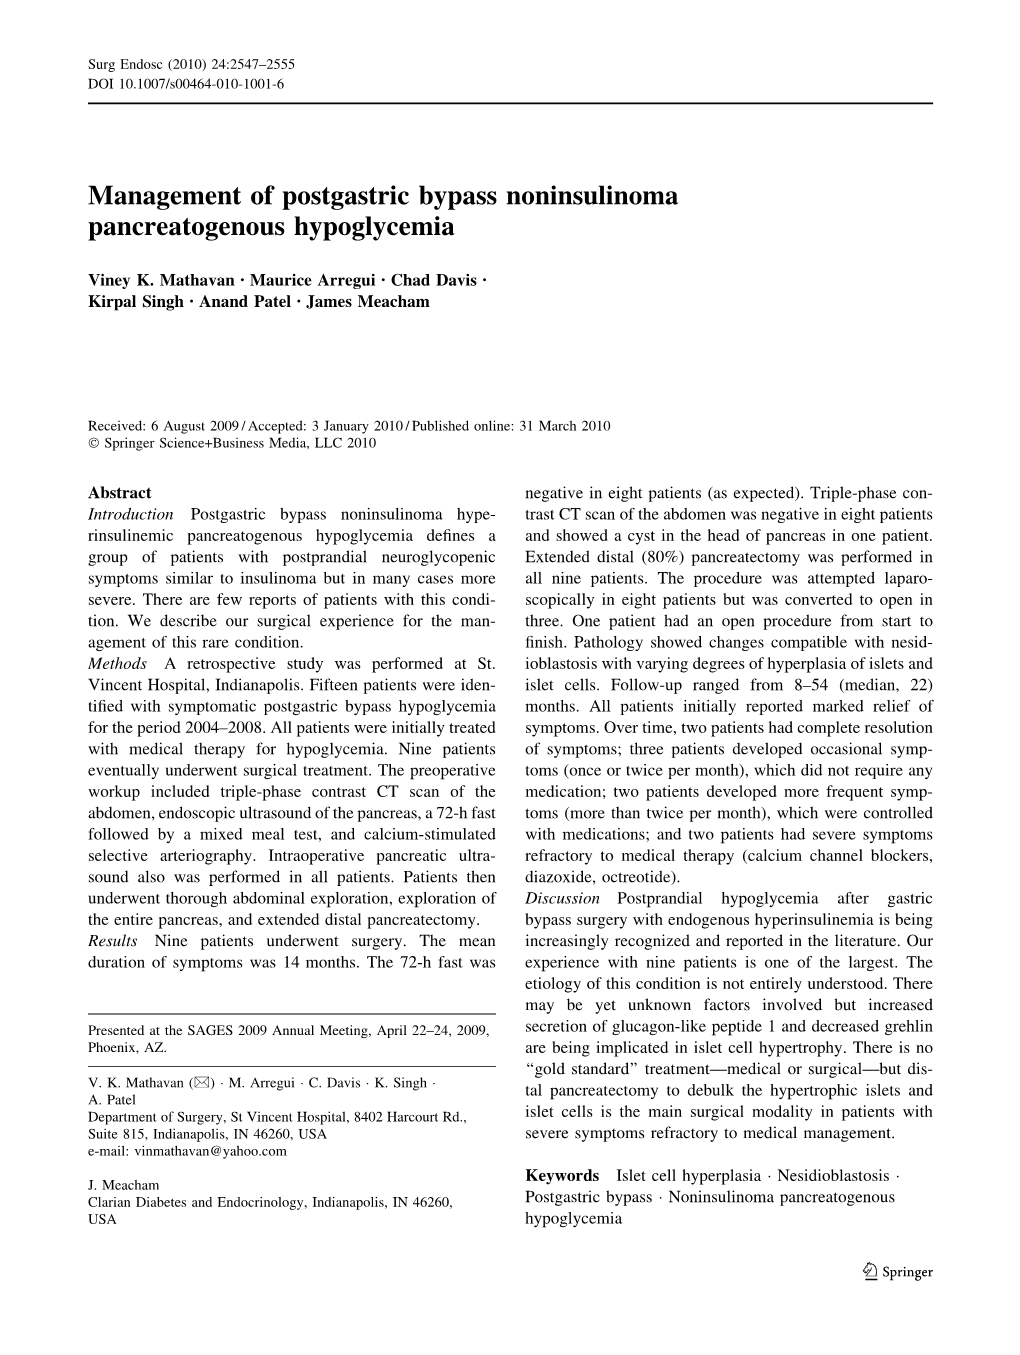 Management of Postgastric Bypass Noninsulinoma Pancreatogenous Hypoglycemia